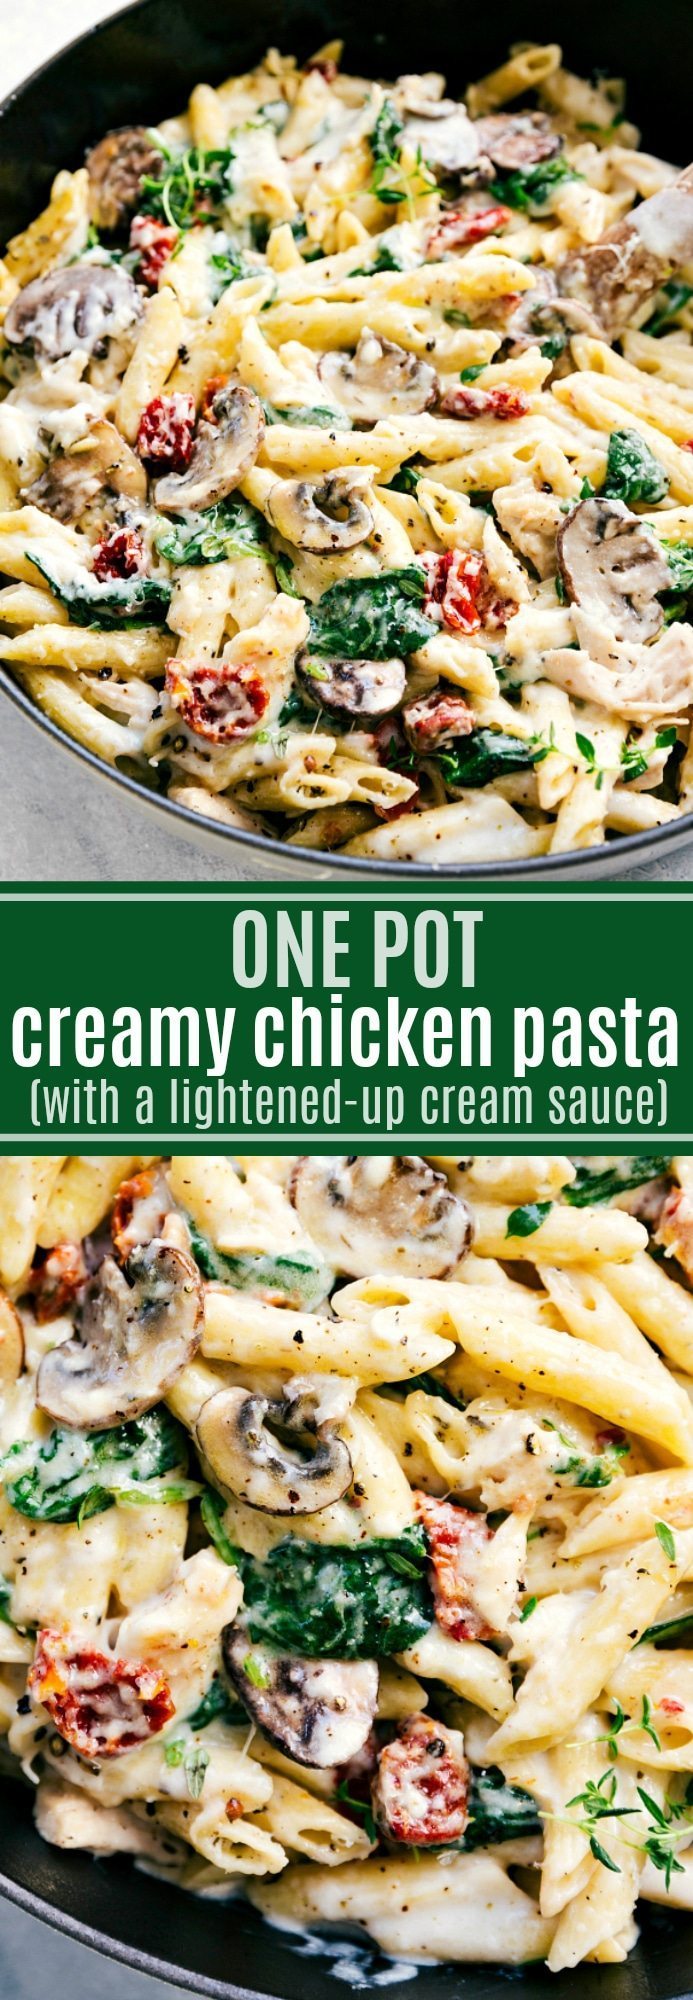 ONE POT Creamy Chicken Penne Pasta with Sun-dried tomatoes and mushrooms. The cream sauce is secretly LIGHTENED-UP. So delicious and easy! I chelseasmessyapron.com #recipe #penne #pasta #easy #quick #one #pot #kidfriendly #delicious #dinner